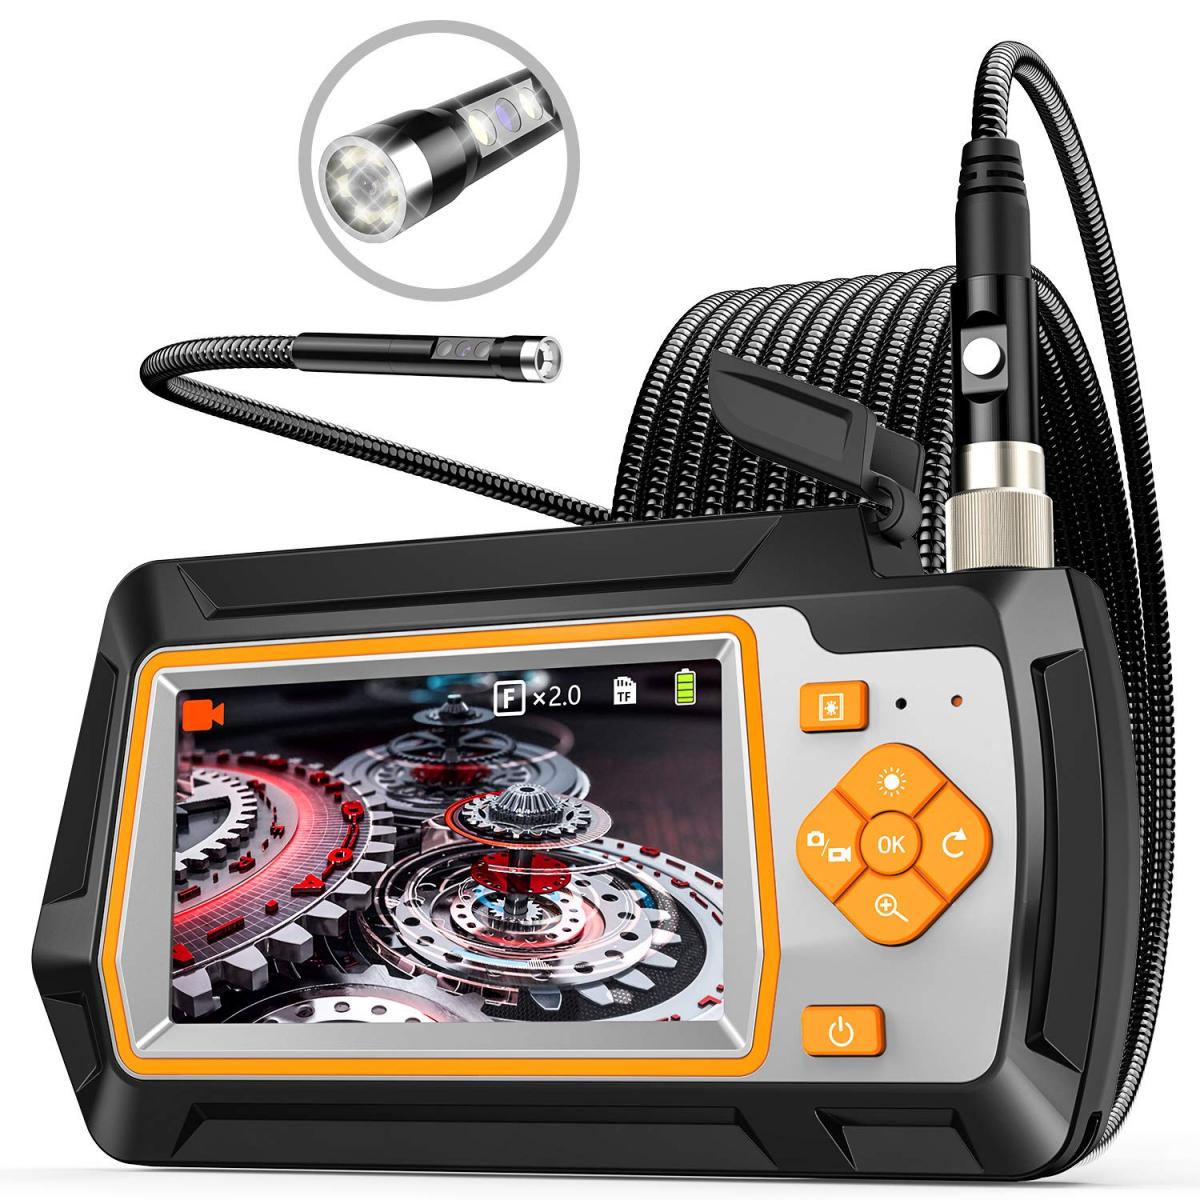 K&F Industrial Endoscope Dual Lens Inspection Camera 5.5mm with Metal Cable  and 4.3' IPS Hard Screen, 8 LED Lights Hydro Camera, 20M /